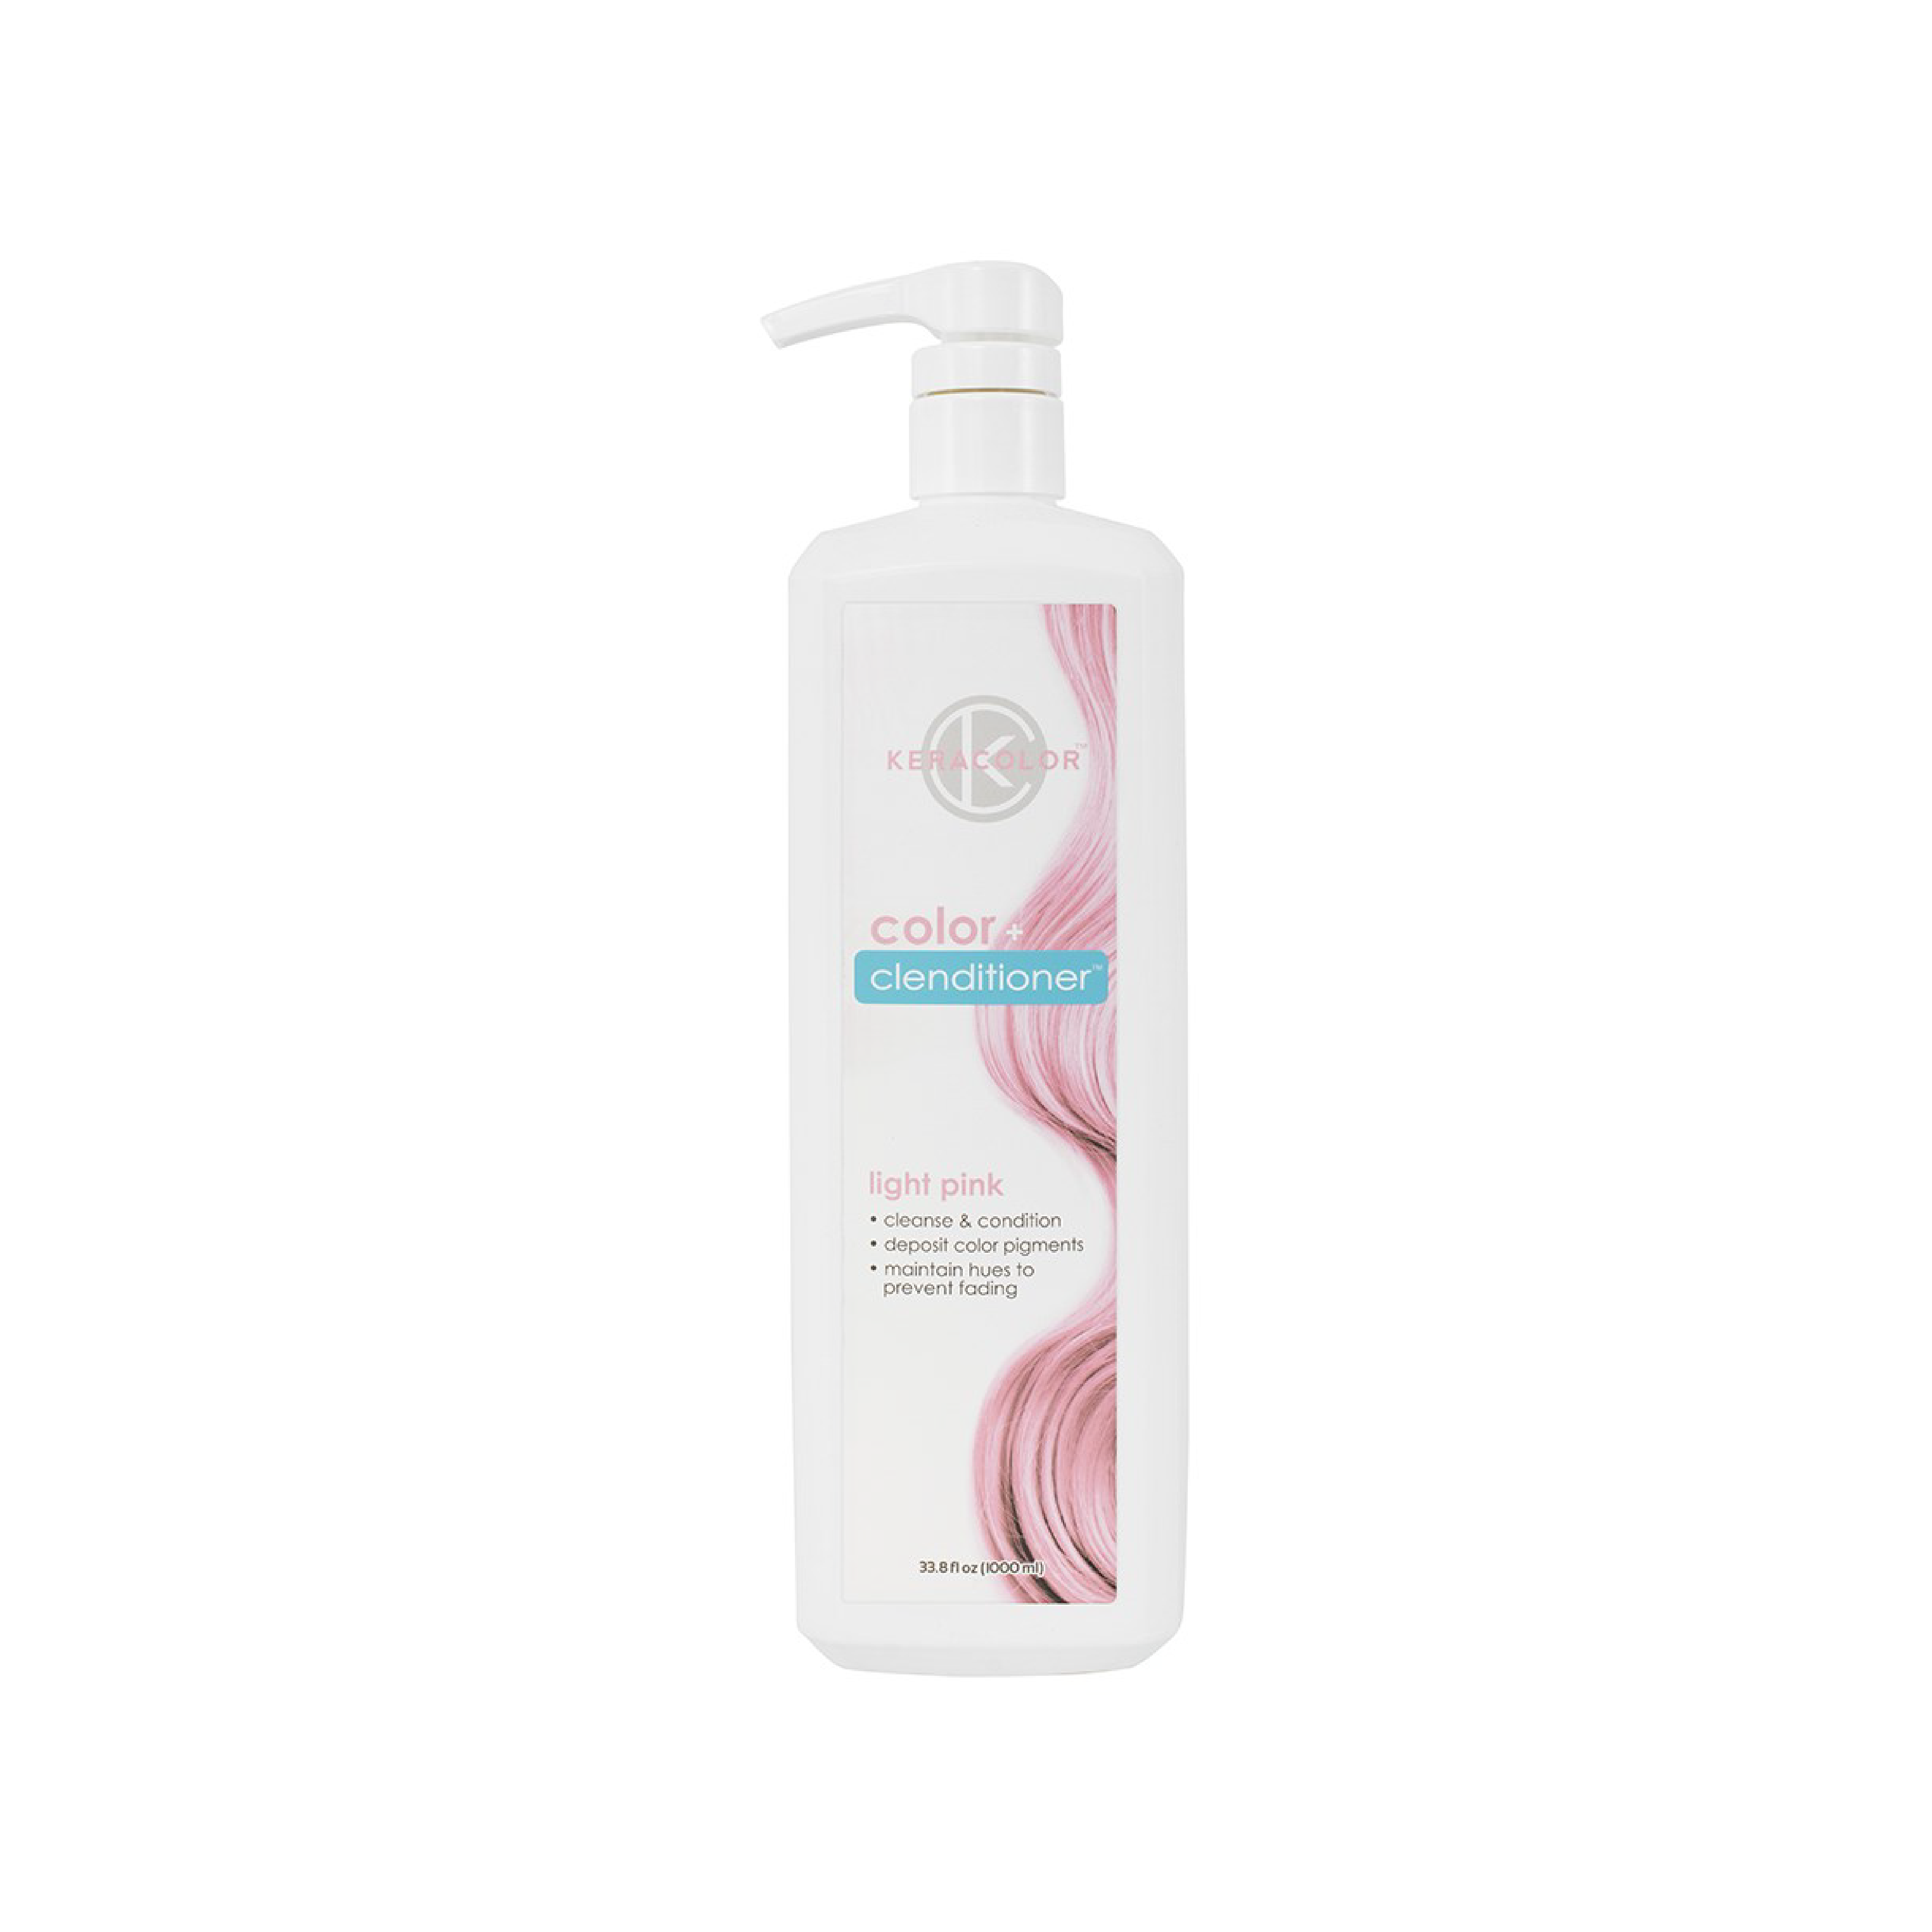 Keracolor Color Clenditioner Light Pink Colouring Shampoo - 1000ml